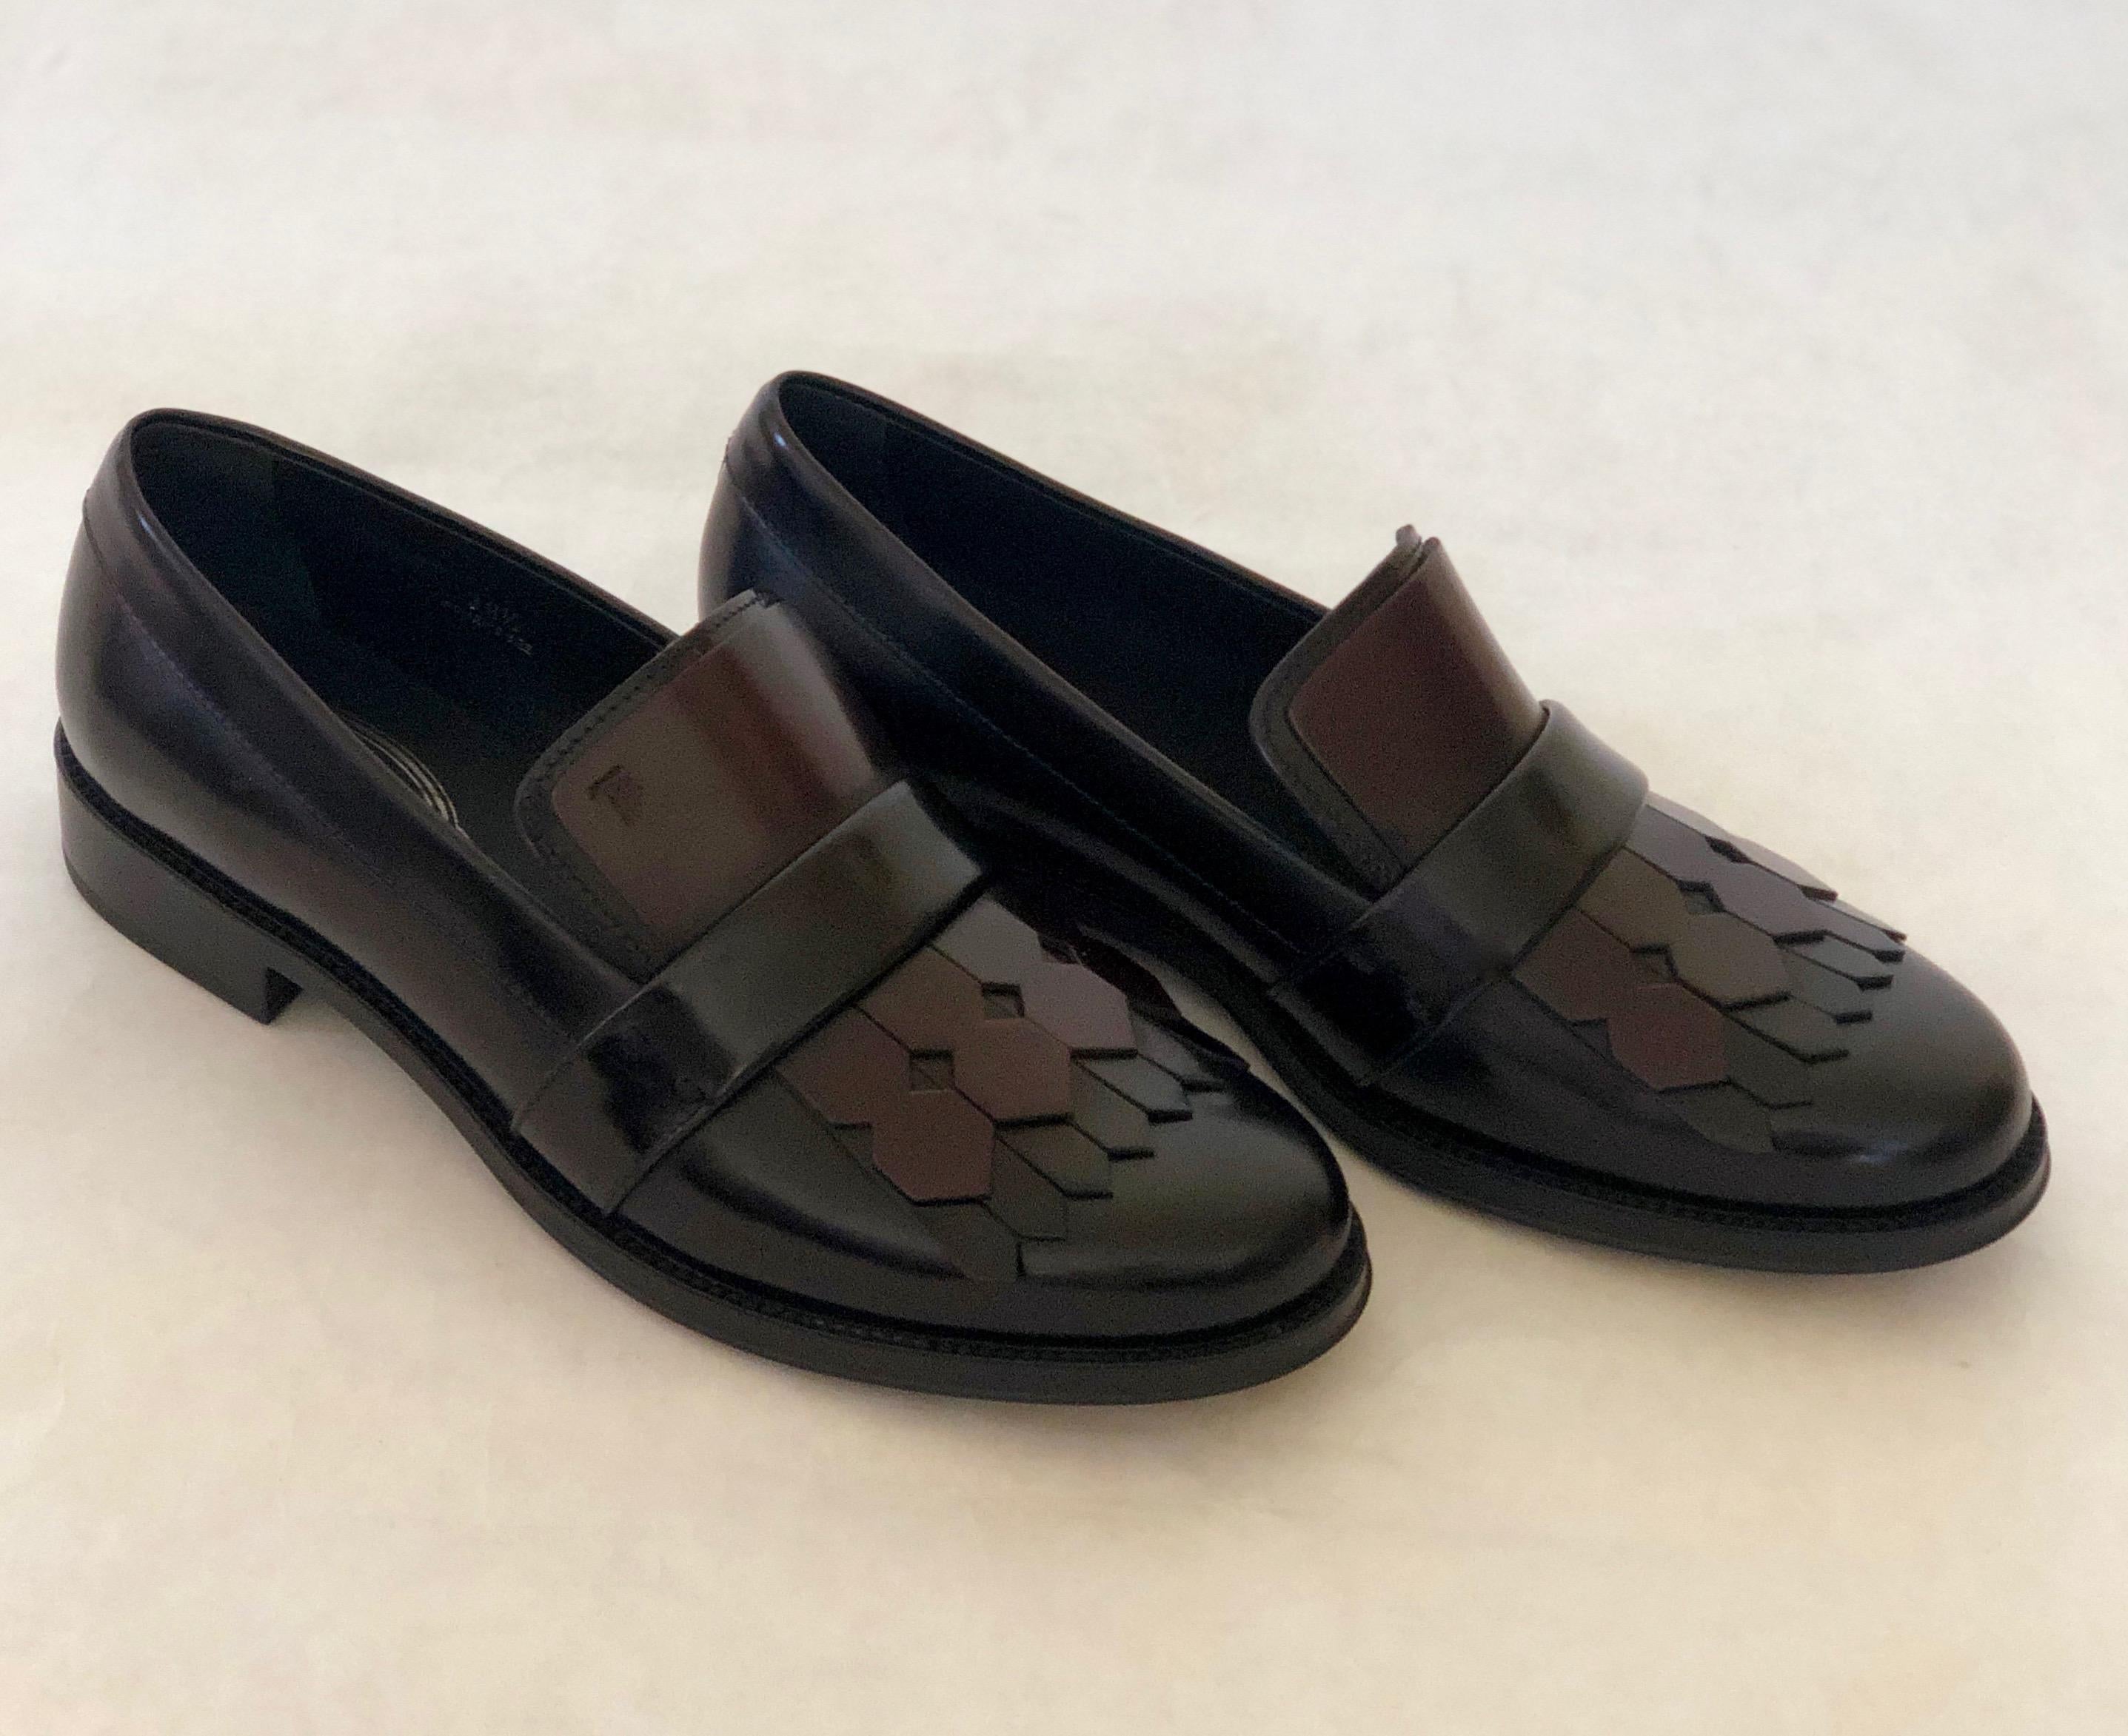 Pair of Tod's Cordovan (Burgundy) & Black Leather Kiltie Tassel Flap Loafers  In Excellent Condition For Sale In Houston, TX